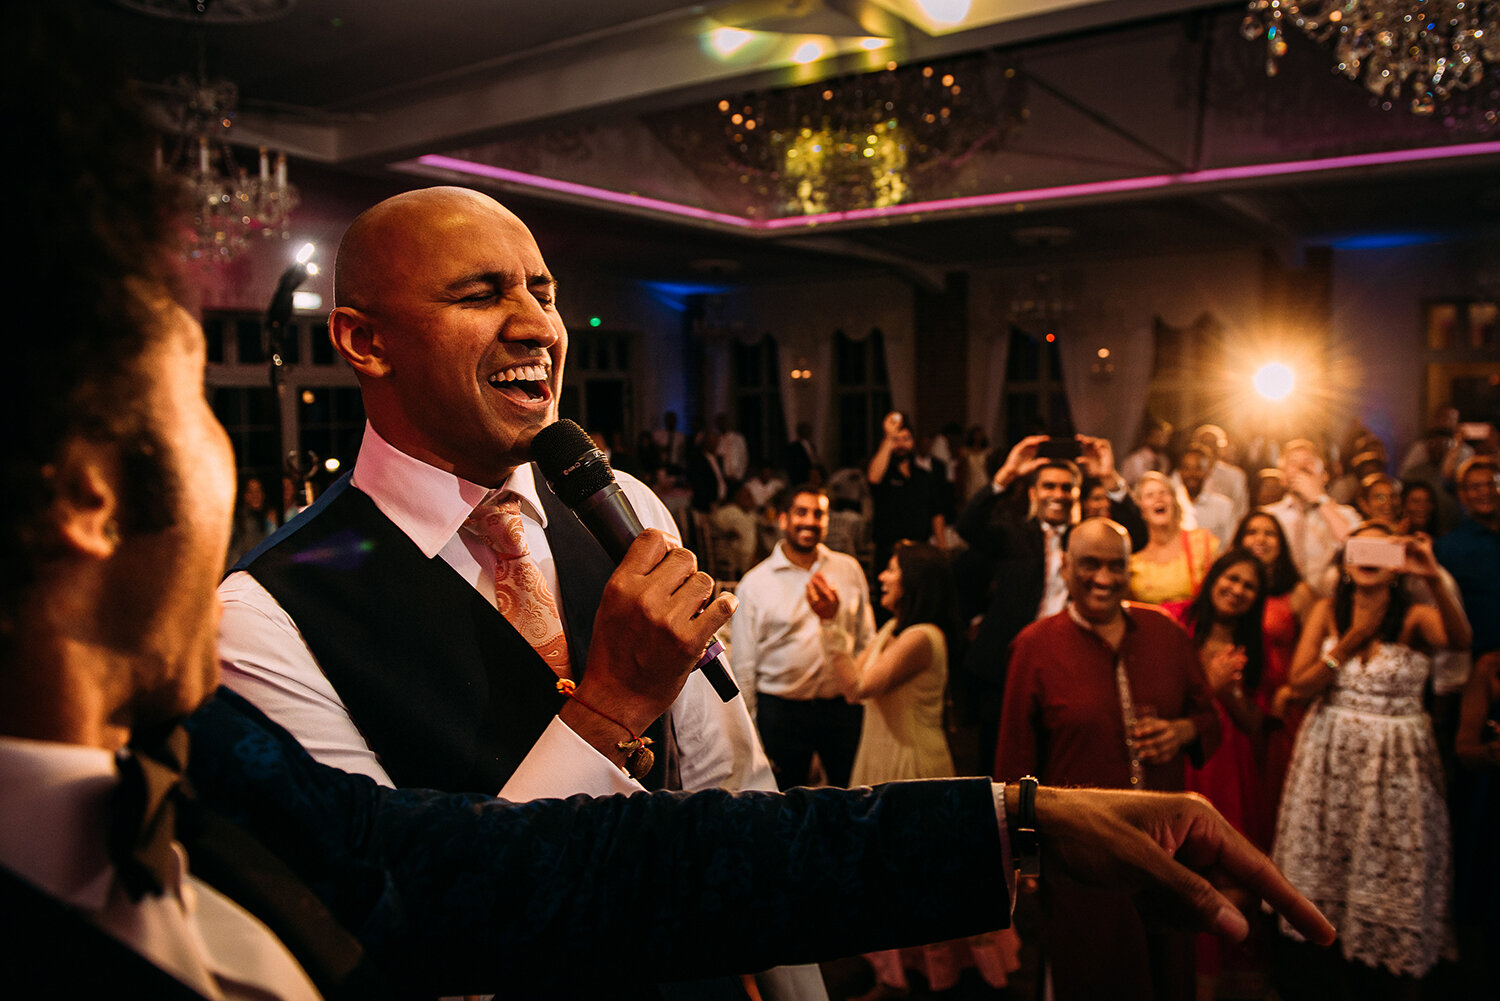  groom singing to the bride on stage 